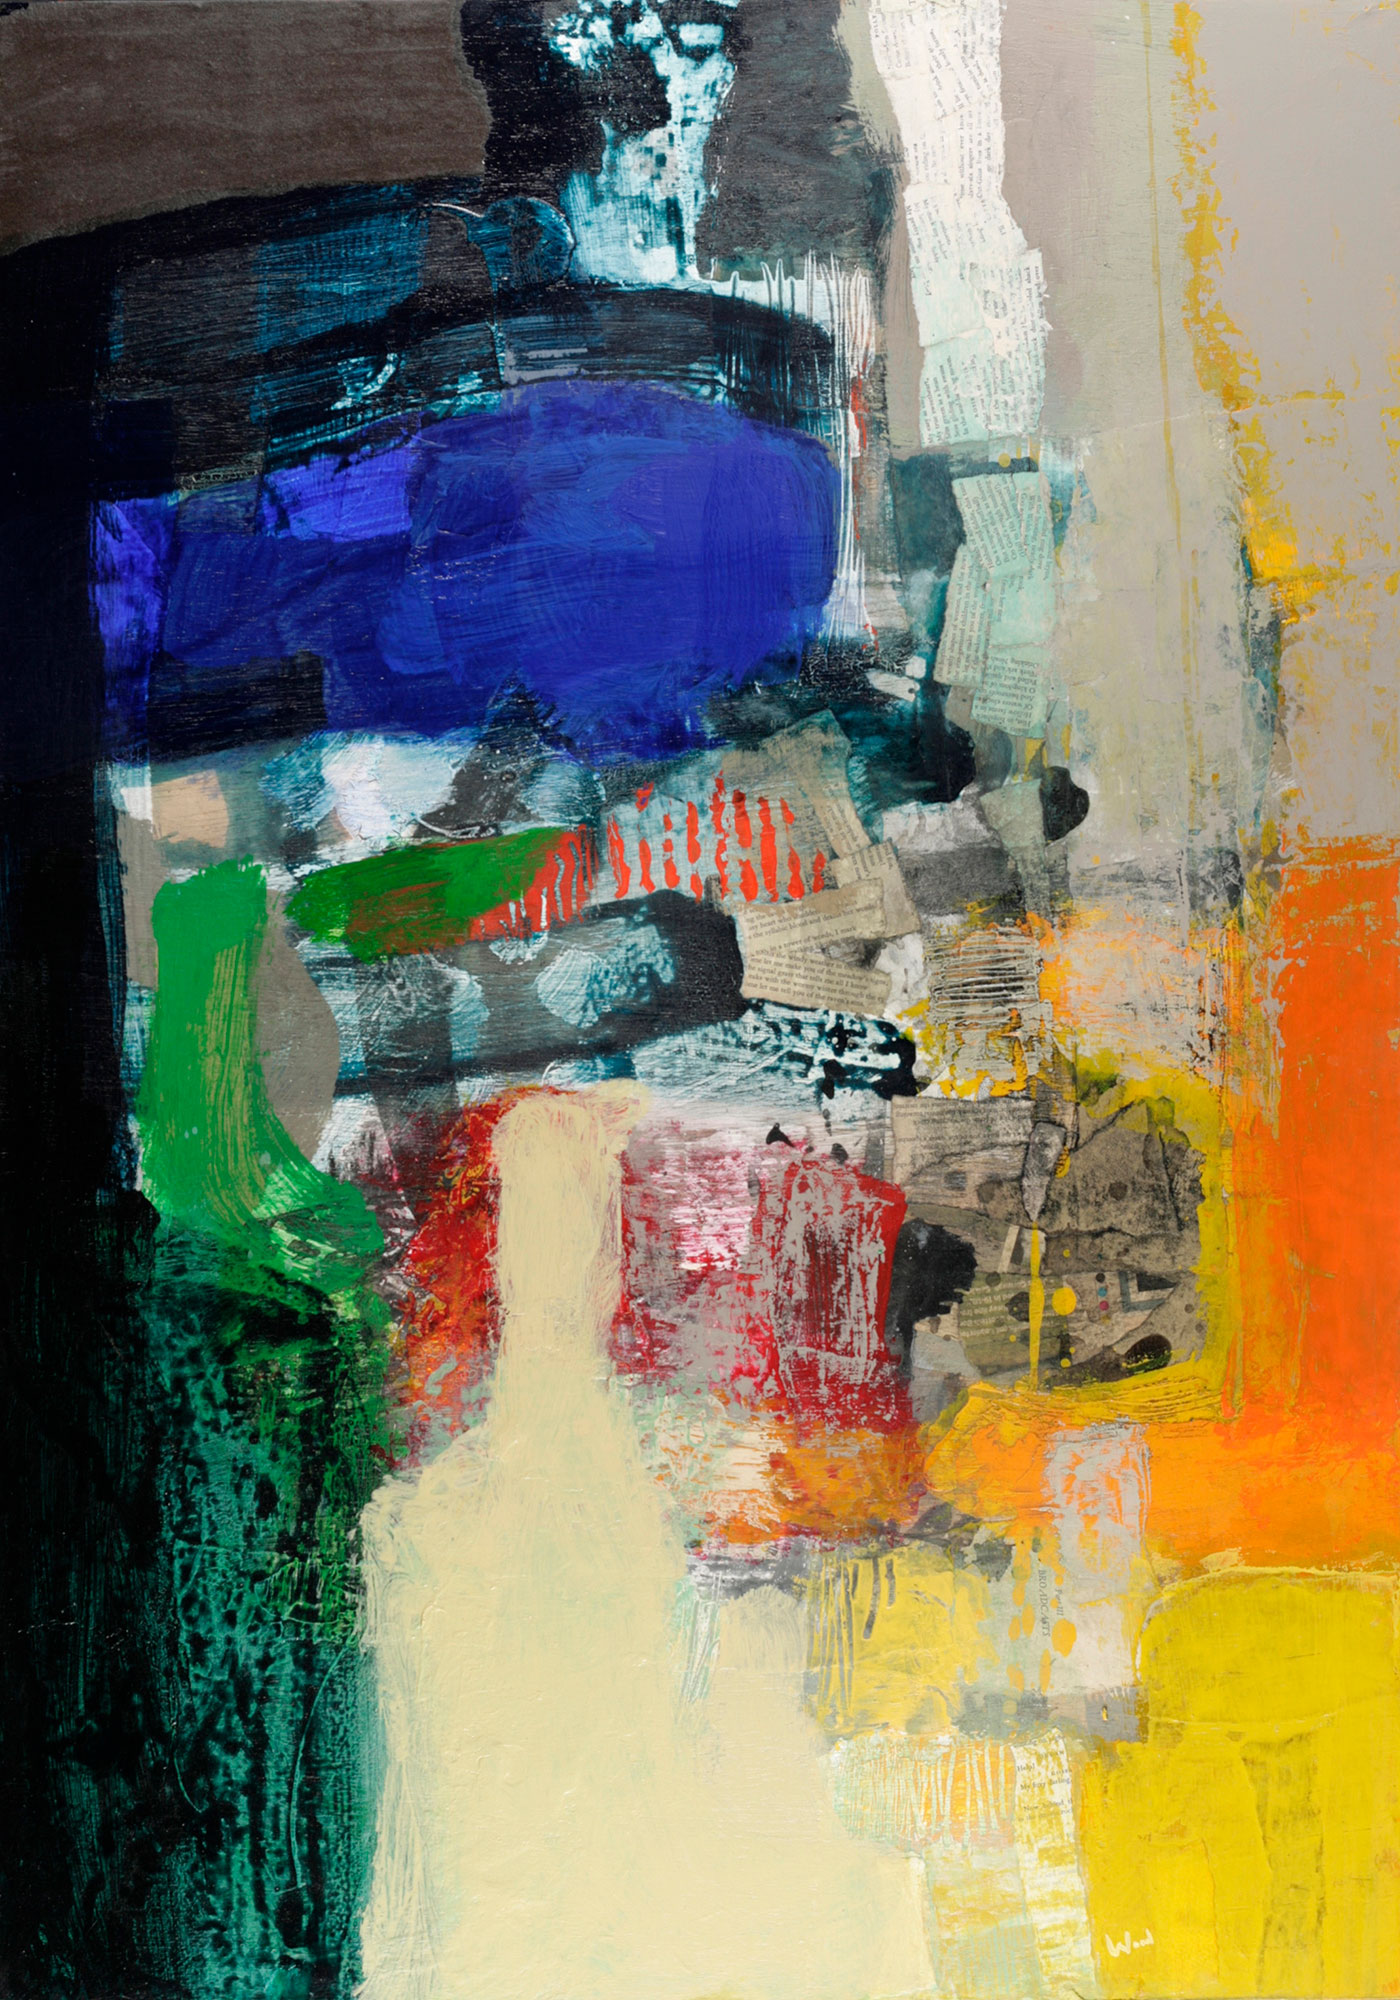 'Regardless of the Rain'; 39.5 x 27.5 inches (100 x 70 cm); Acrylic, Mixed Media & Collage on Panel; Cat. 1312 [AVAILABLE]